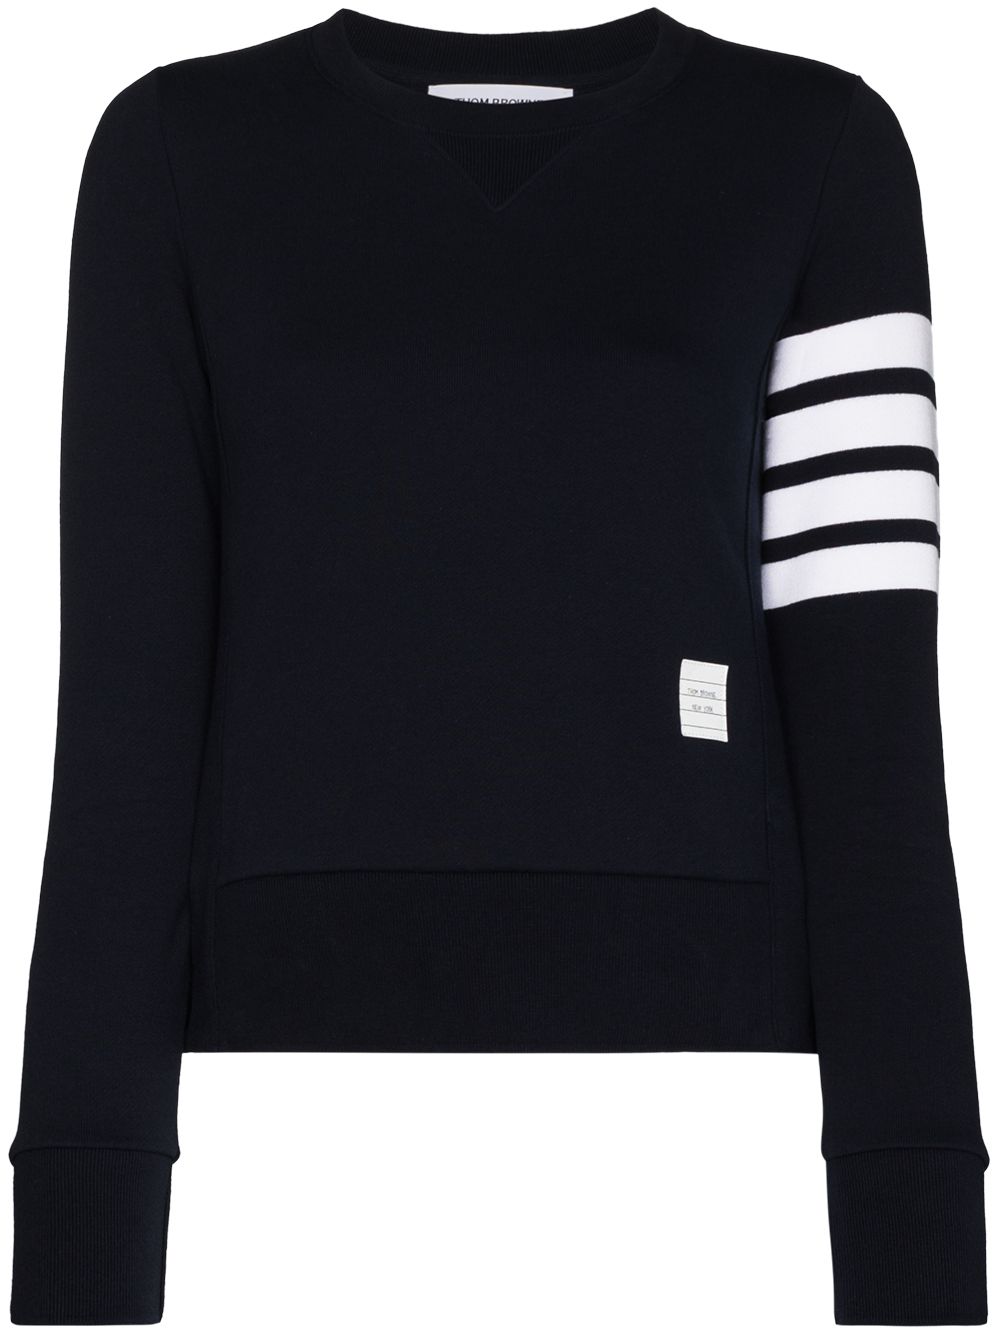 THOM BROWNE Navy Striped Cotton Jumper Sweater for Women